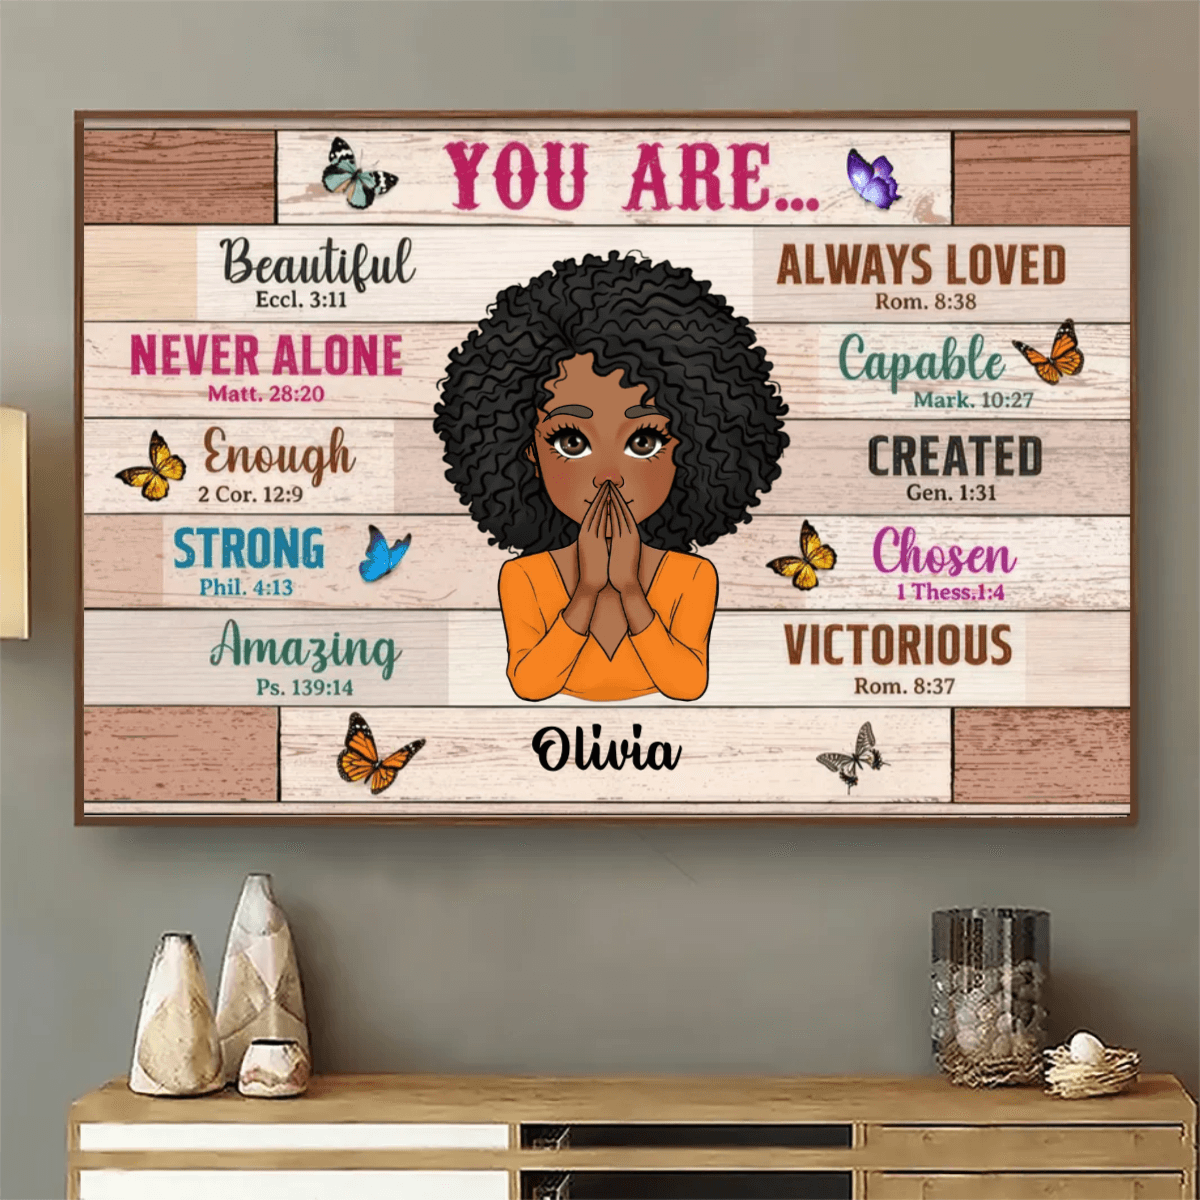 You Are Beautiful Woman - Personalized Horizontal Poster - Gift for Black Woman, Black Girl, African American, Black History Month, Juneteenth